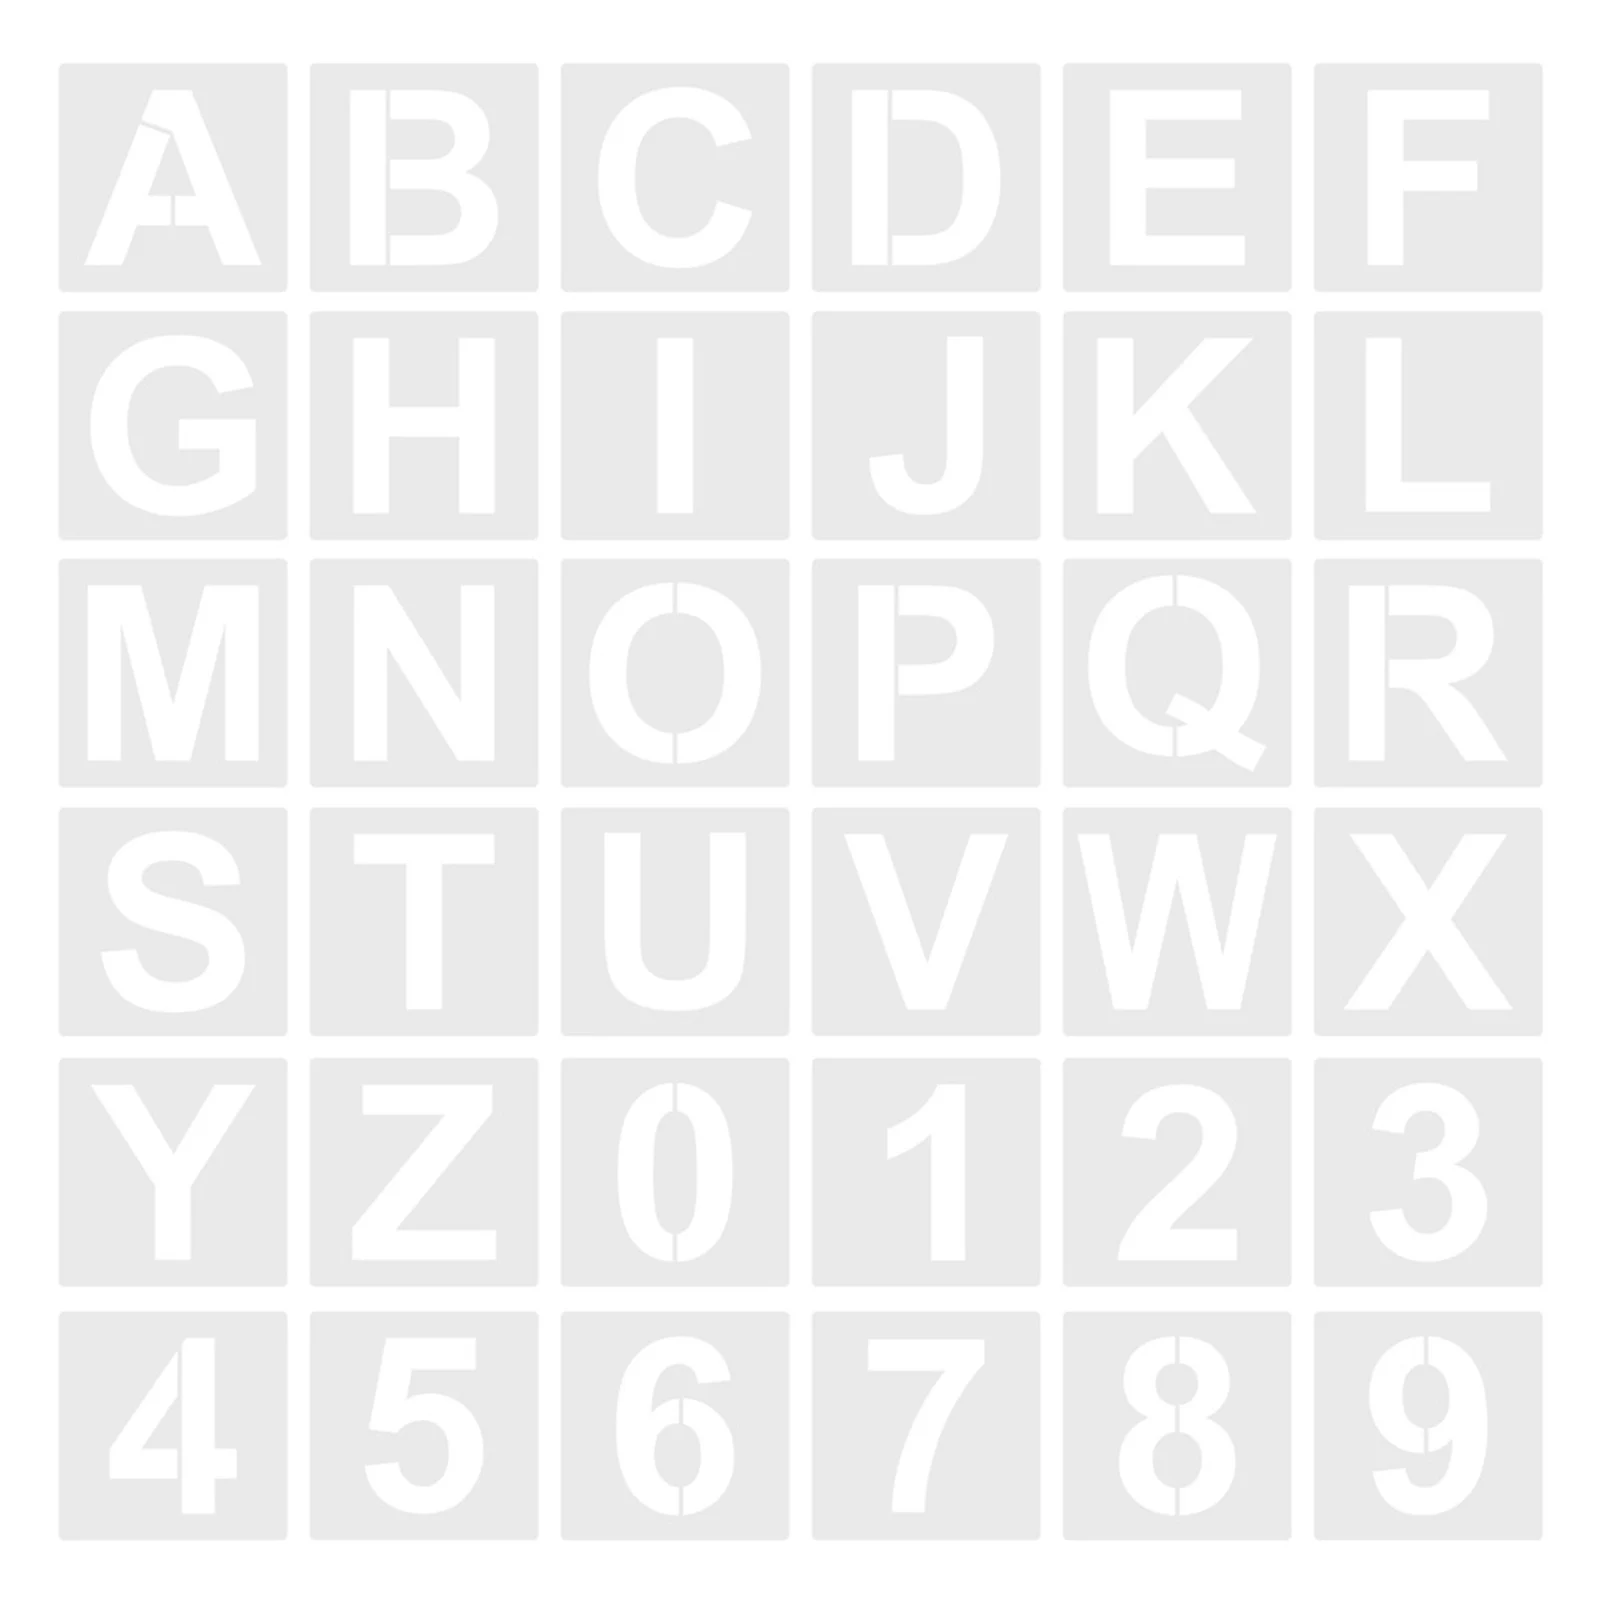 

36pcs 4inch Learning School Number Template Reusable DIY Signage Wall Craft Art Decoration Alphabet Letter Stencil Chalkboard